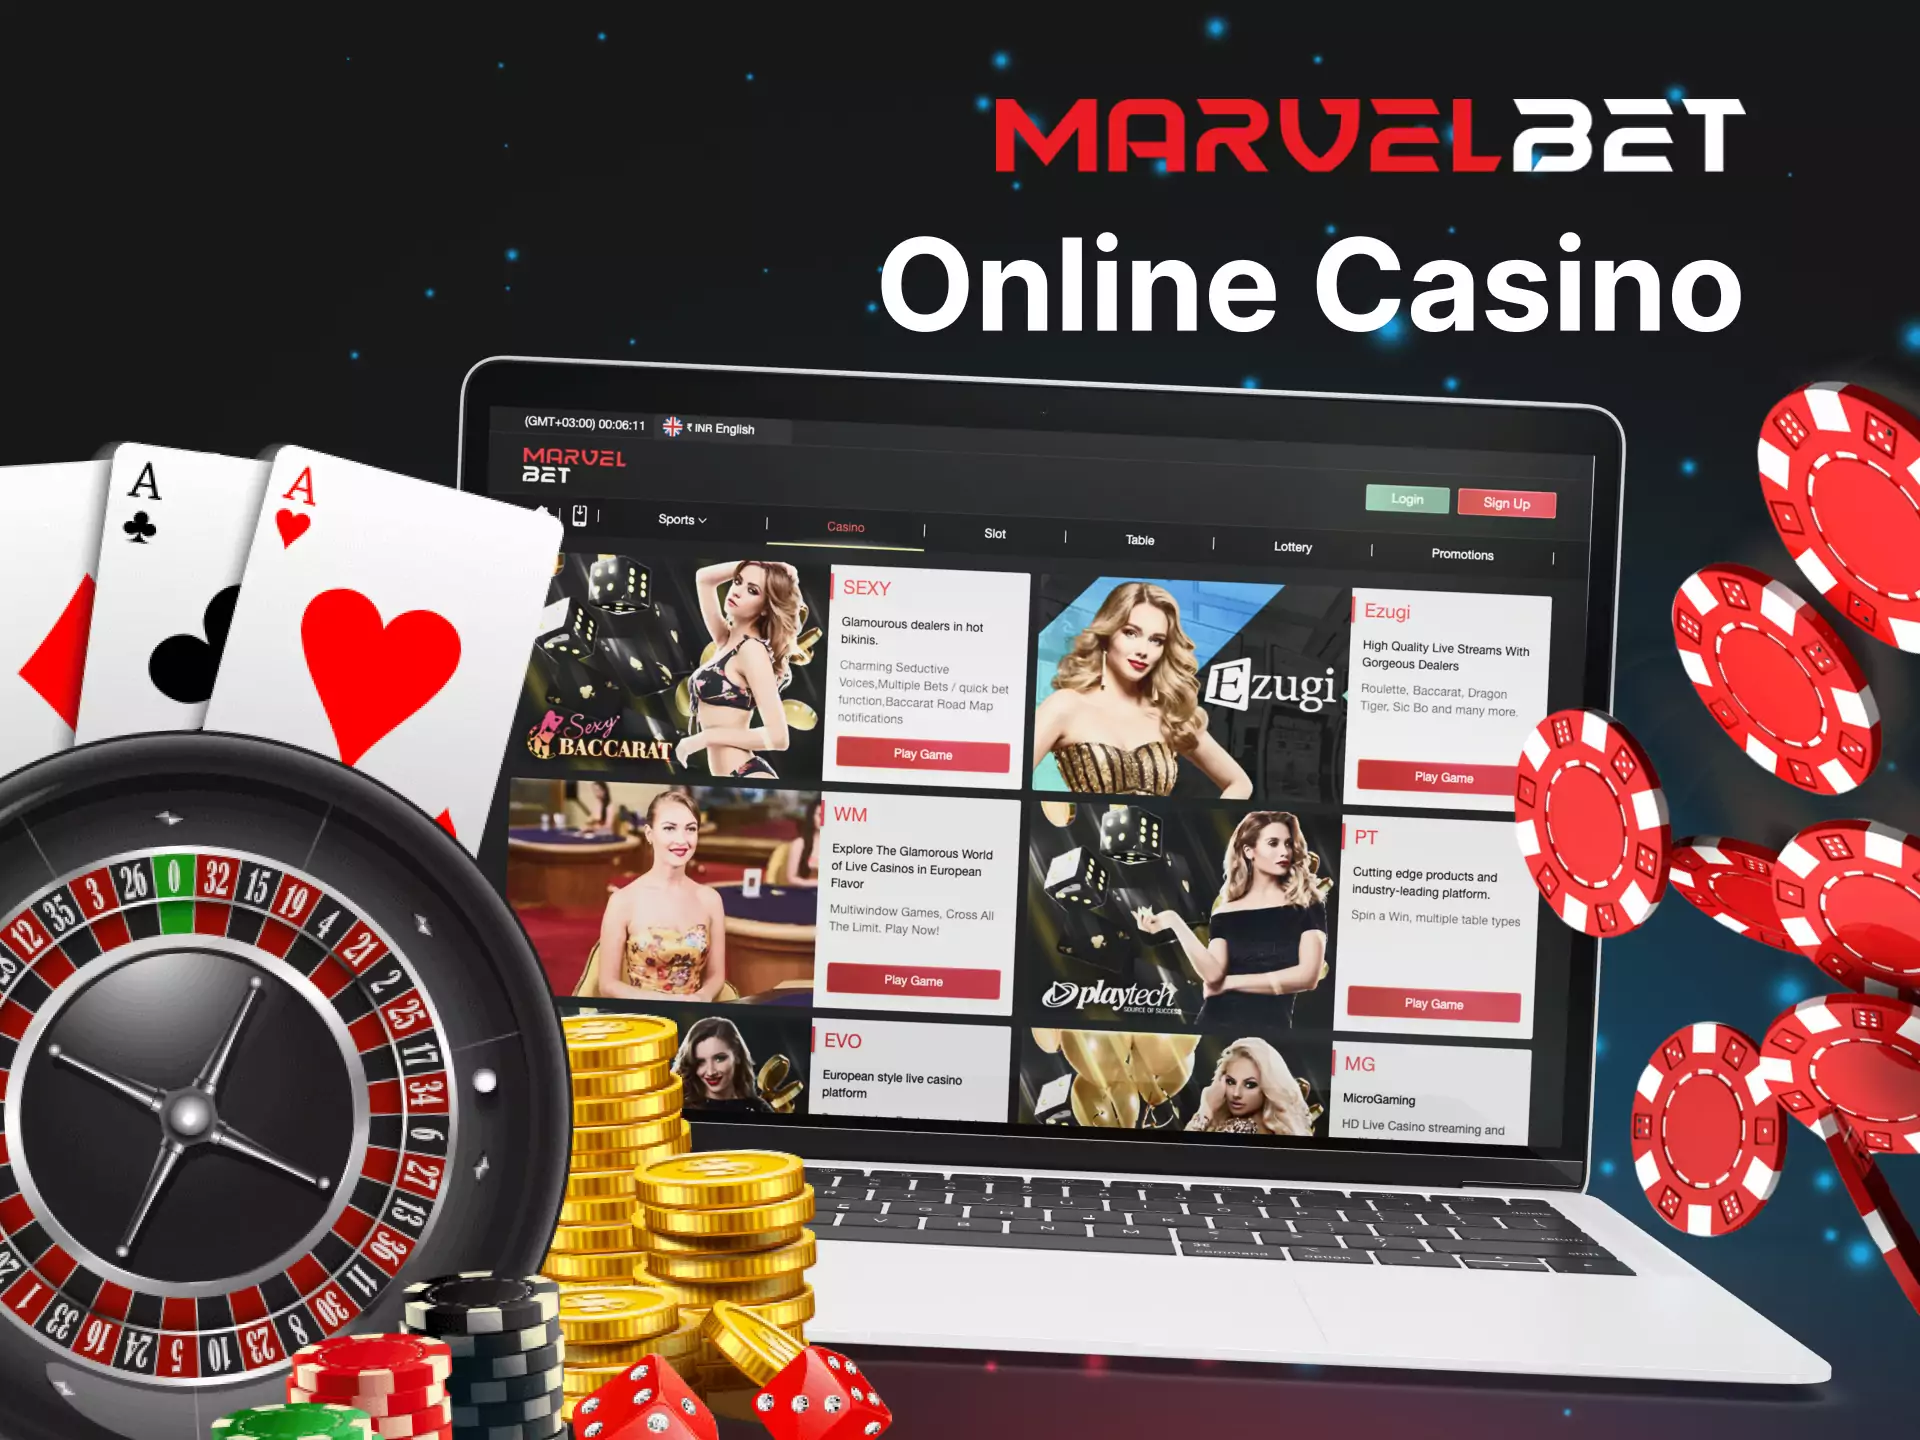 In the Marvelbet Online Casino, you find slots, poker, baccarat, roulette and many other games.